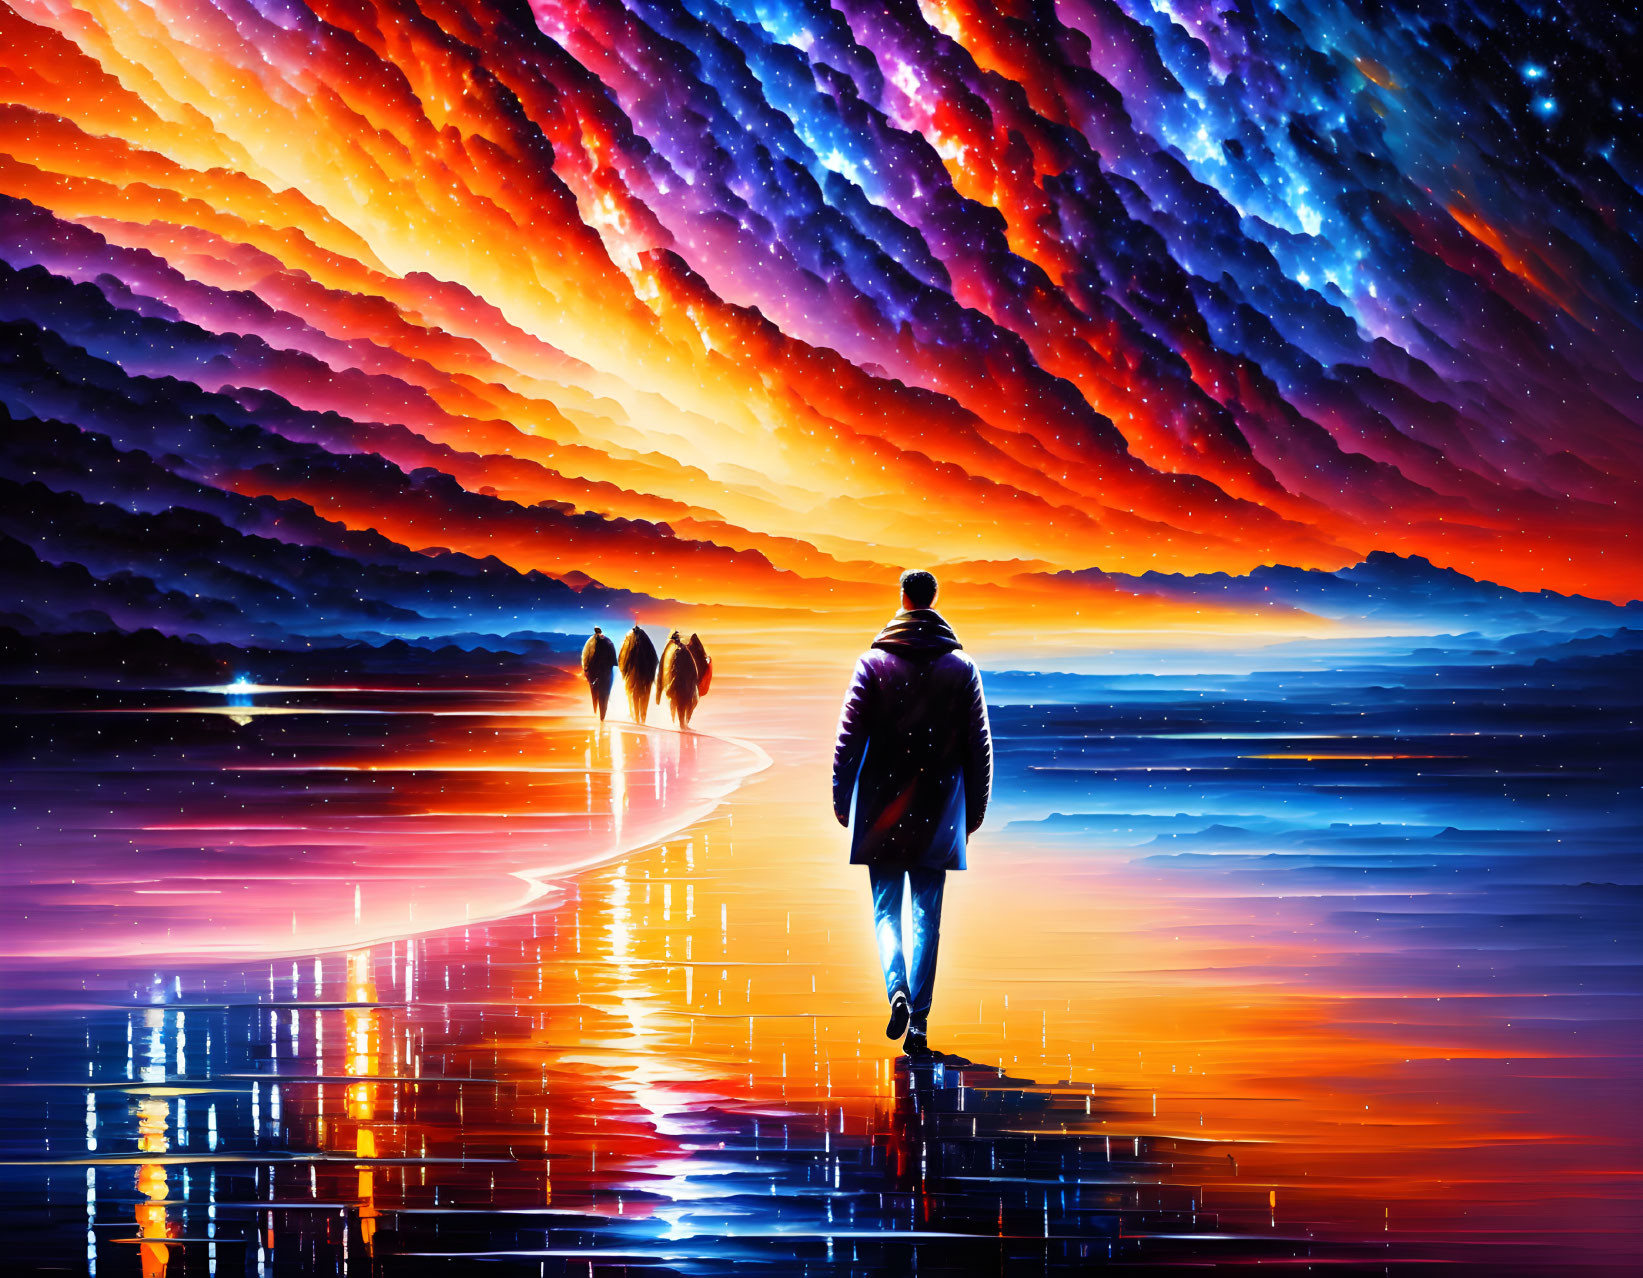 Person walking on reflective surface towards vibrant, colorful horizon with animal silhouettes.